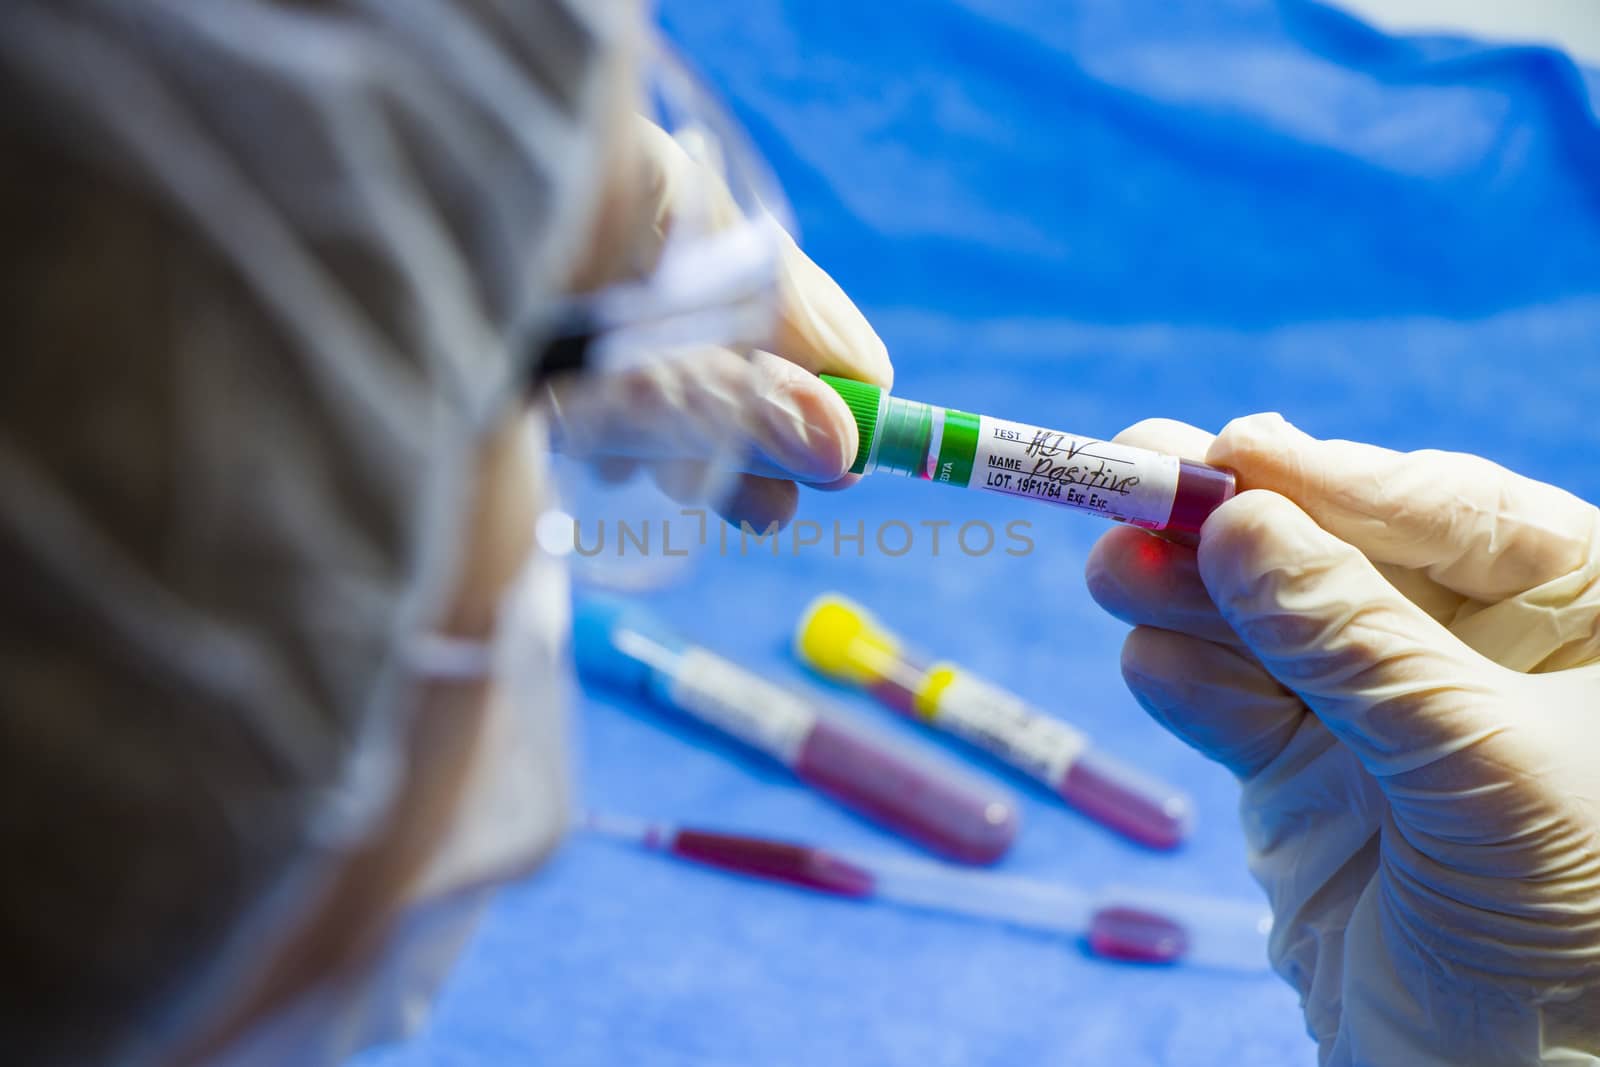 Hiv and aids infection test, doctors face and hand holding tube with blood on the blue background. by Taidundua